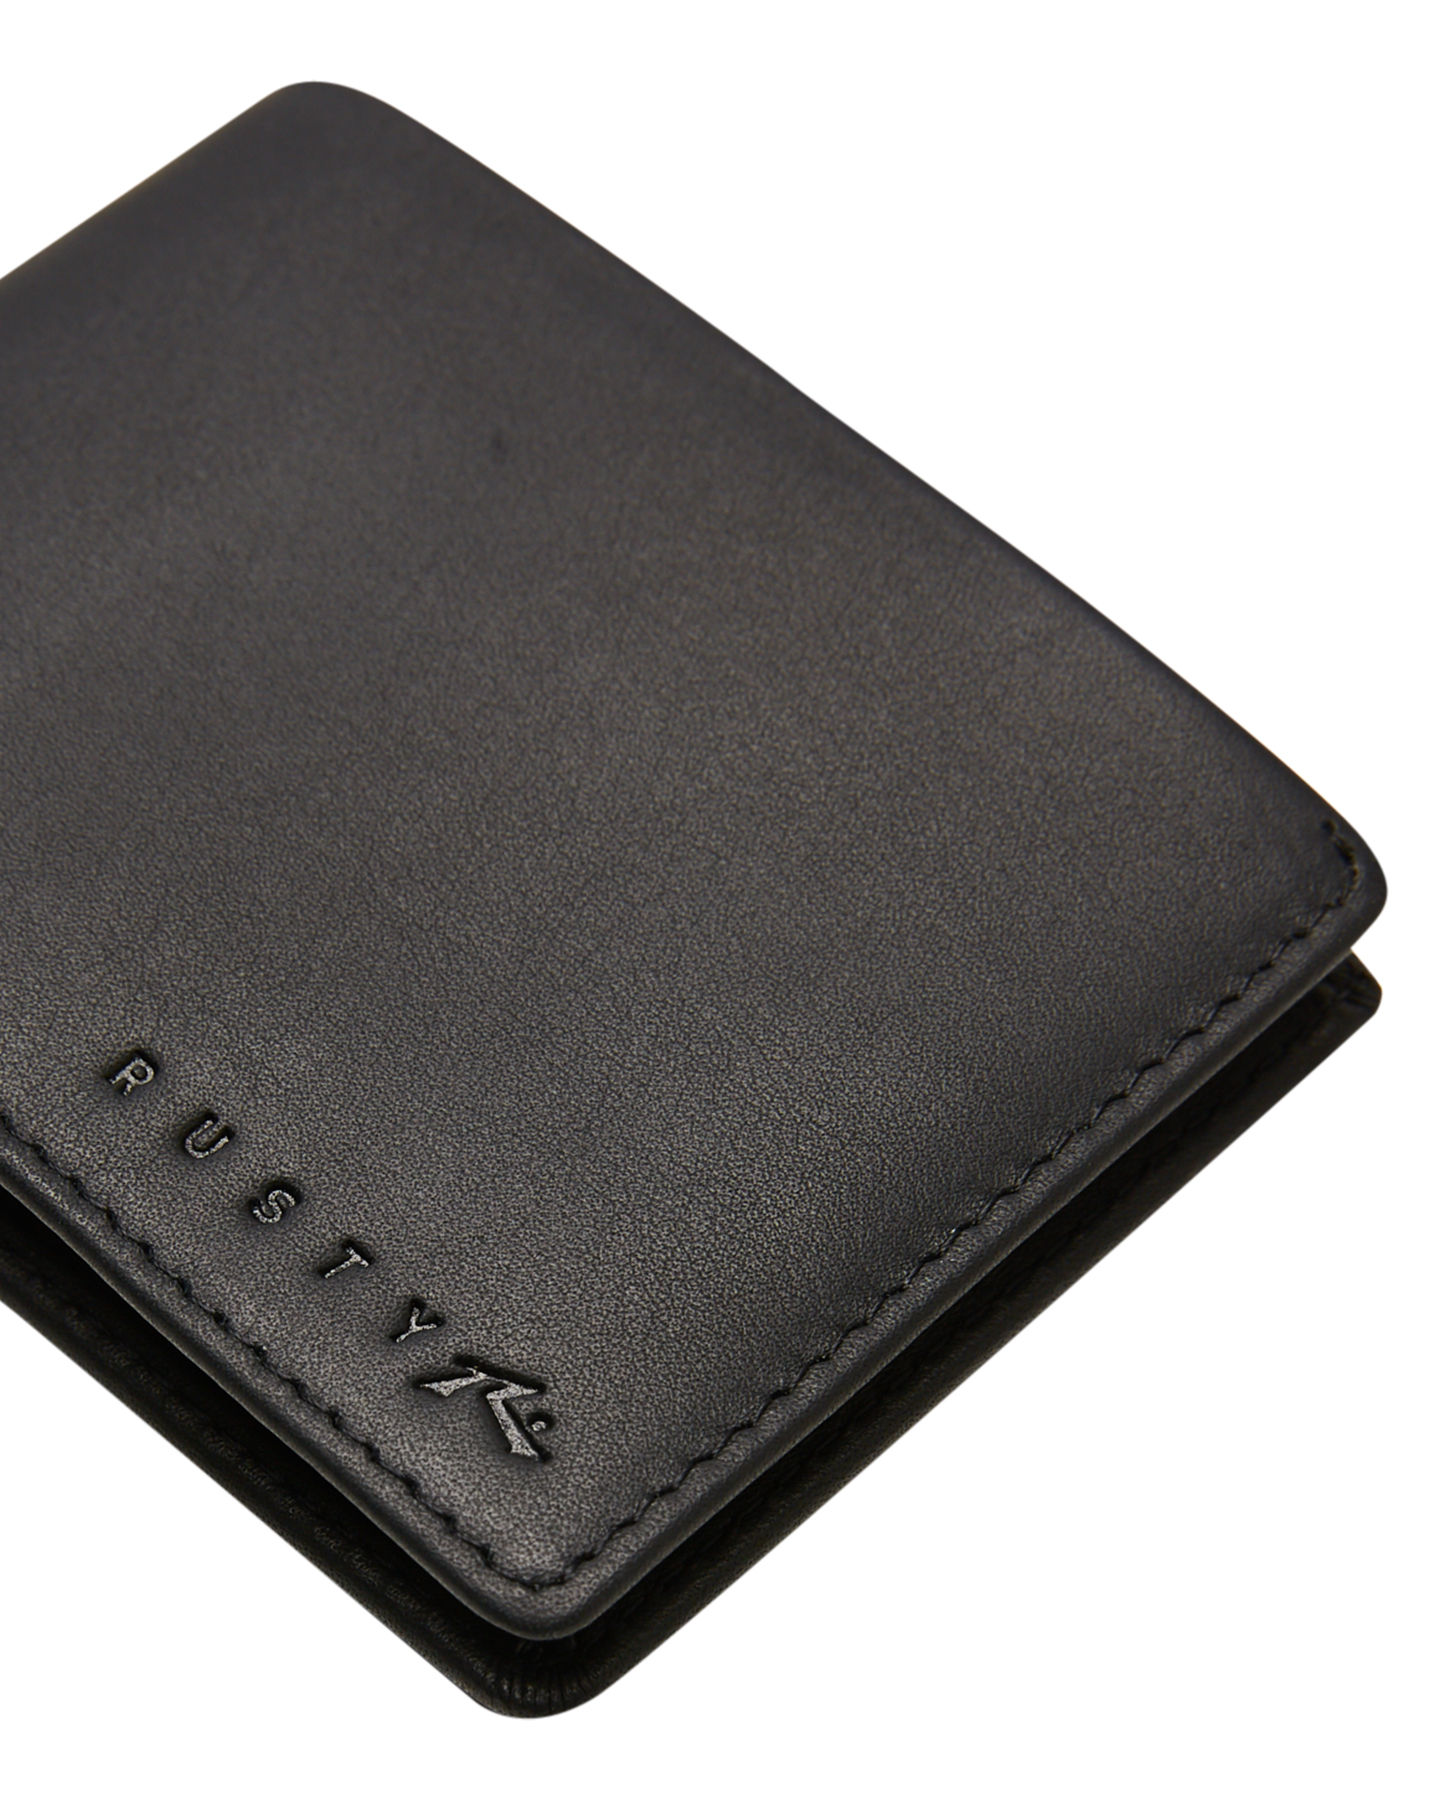 Rusty Stealth Leather Wallet - Black | SurfStitch